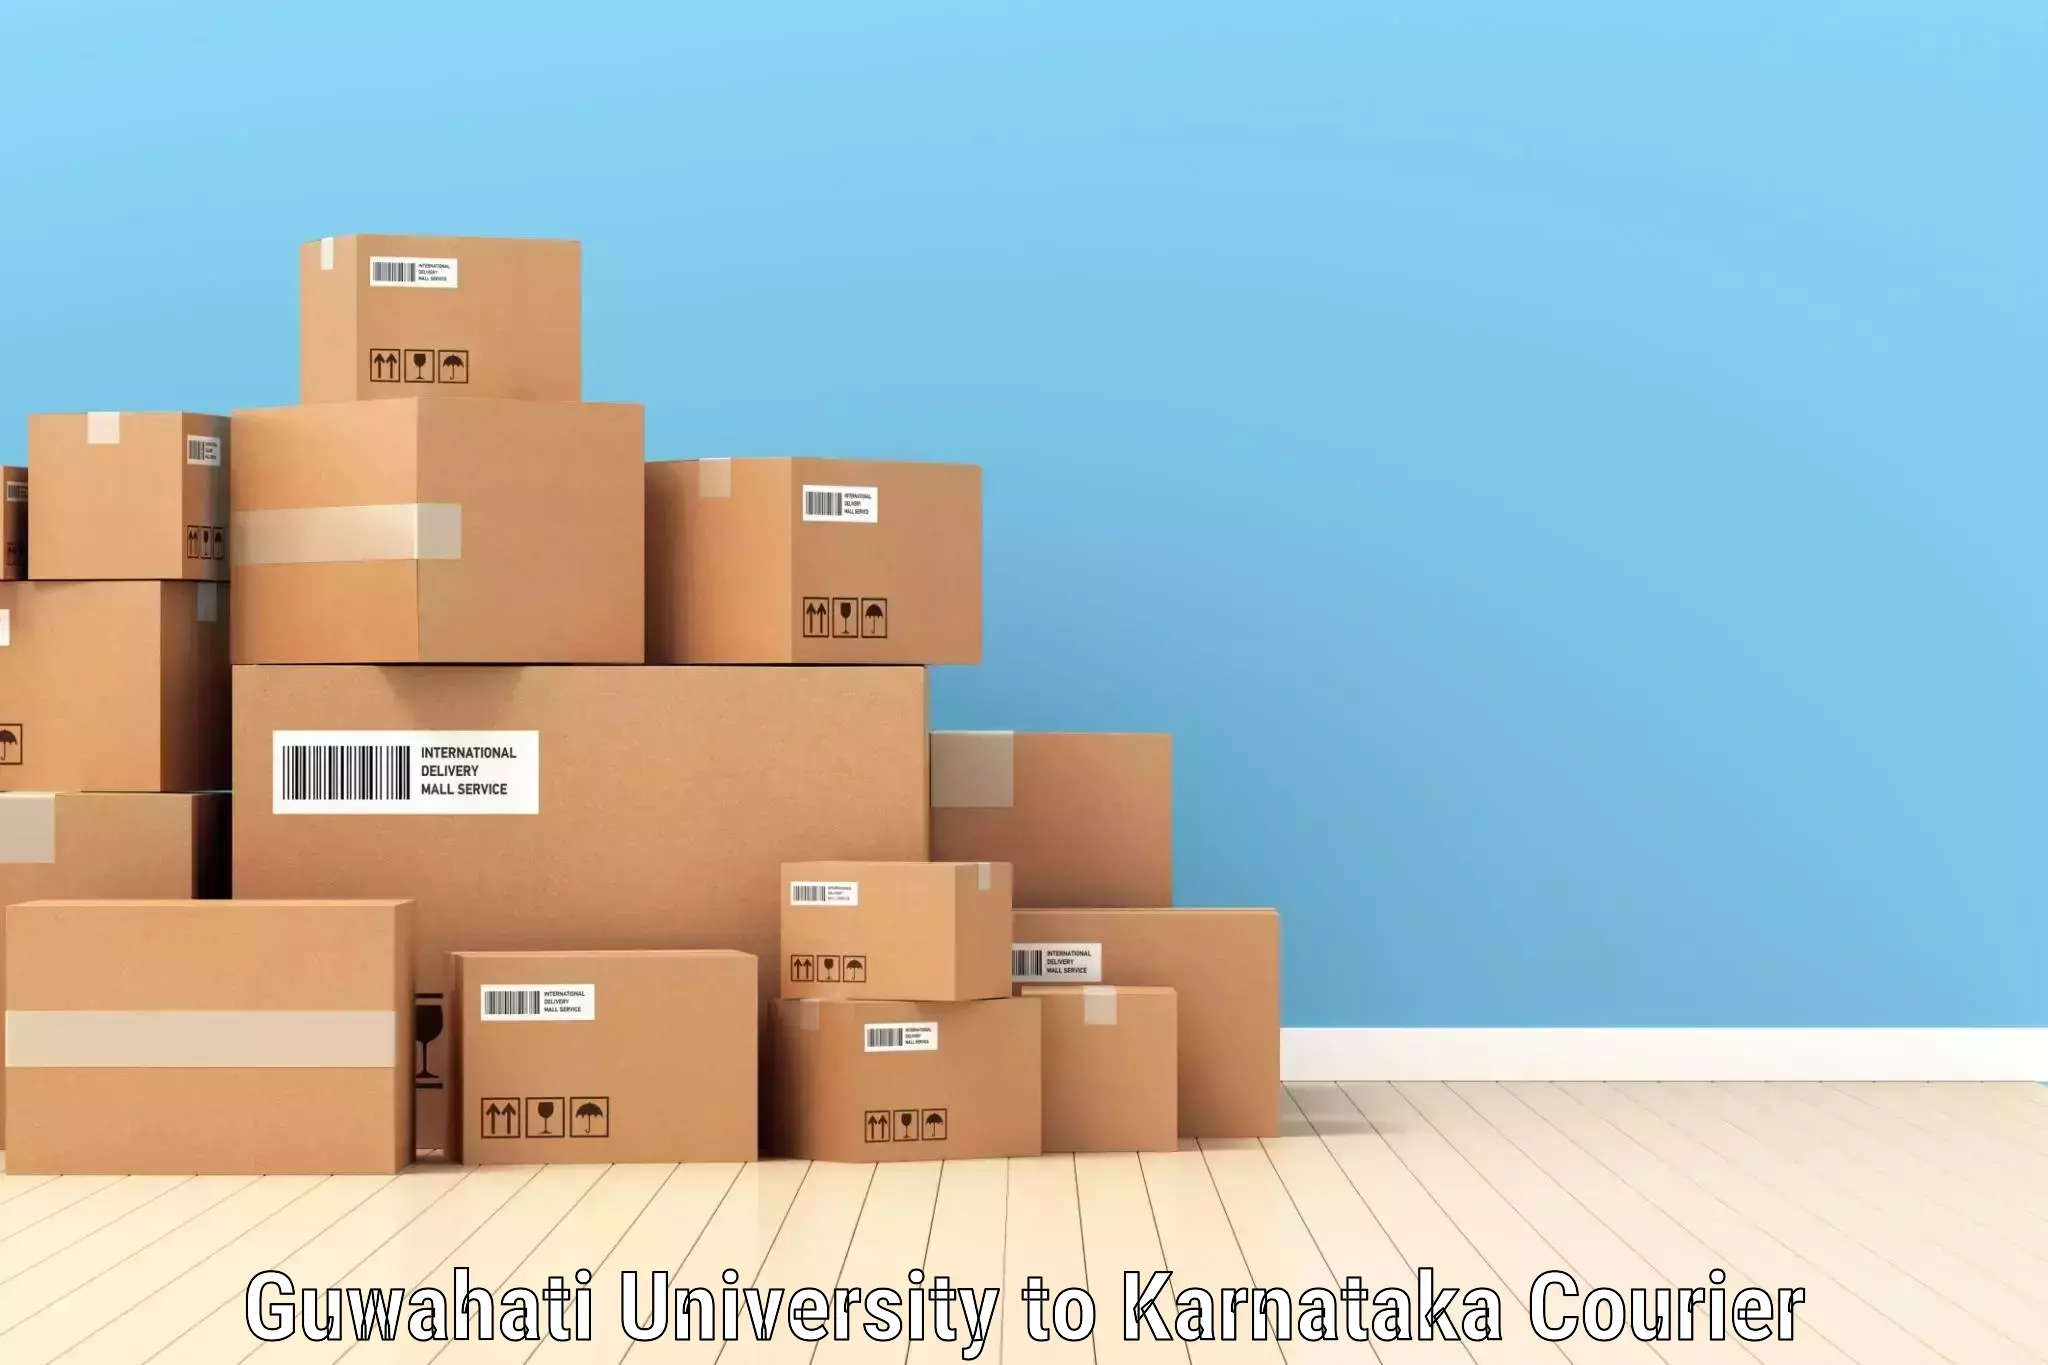 Professional courier services Guwahati University to Mudhol